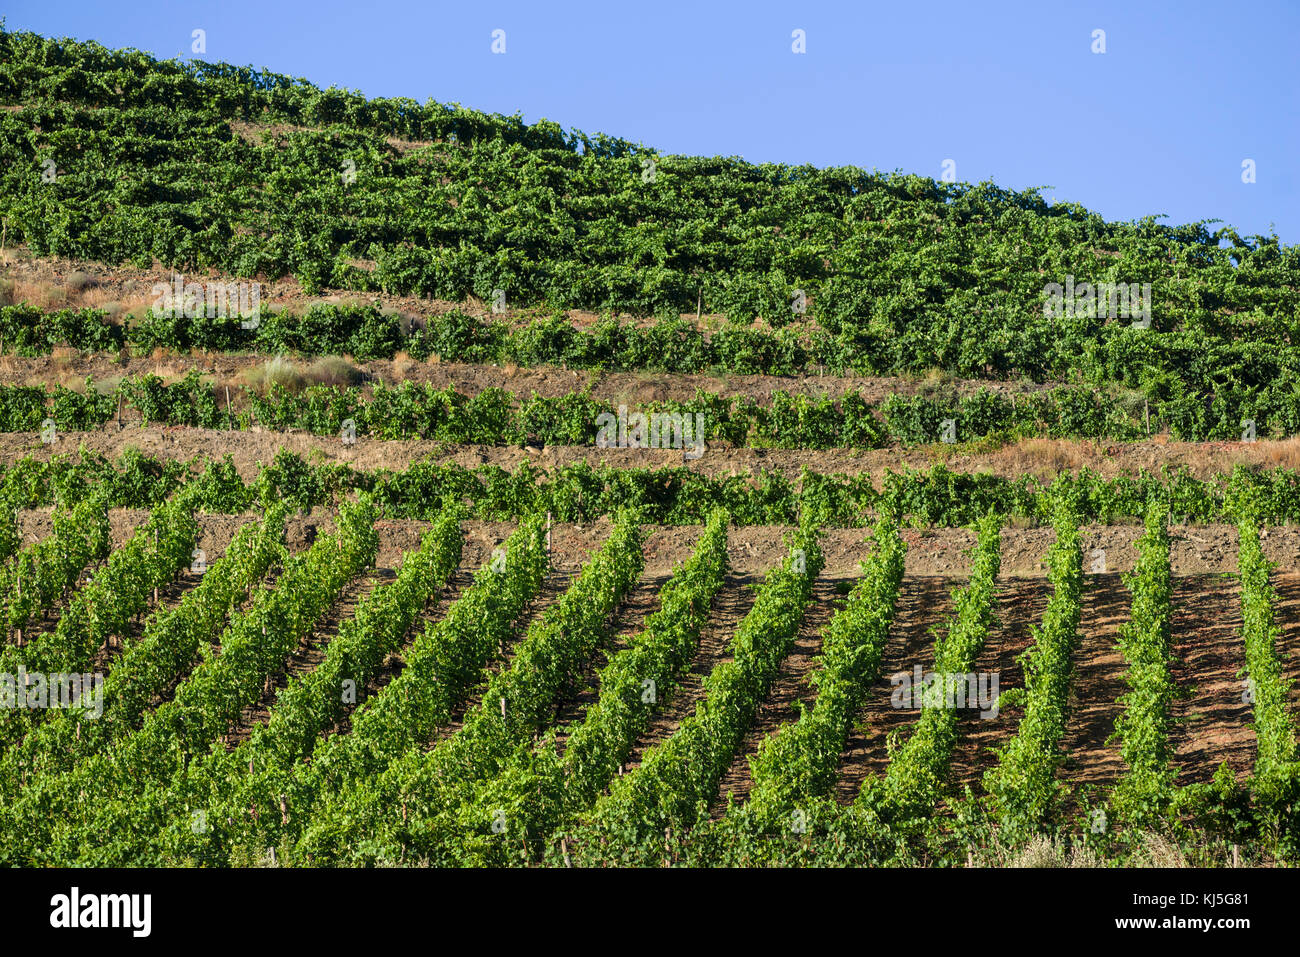 Vineyards cover the slopes above the Rio Douro, Portugal Stock Photo